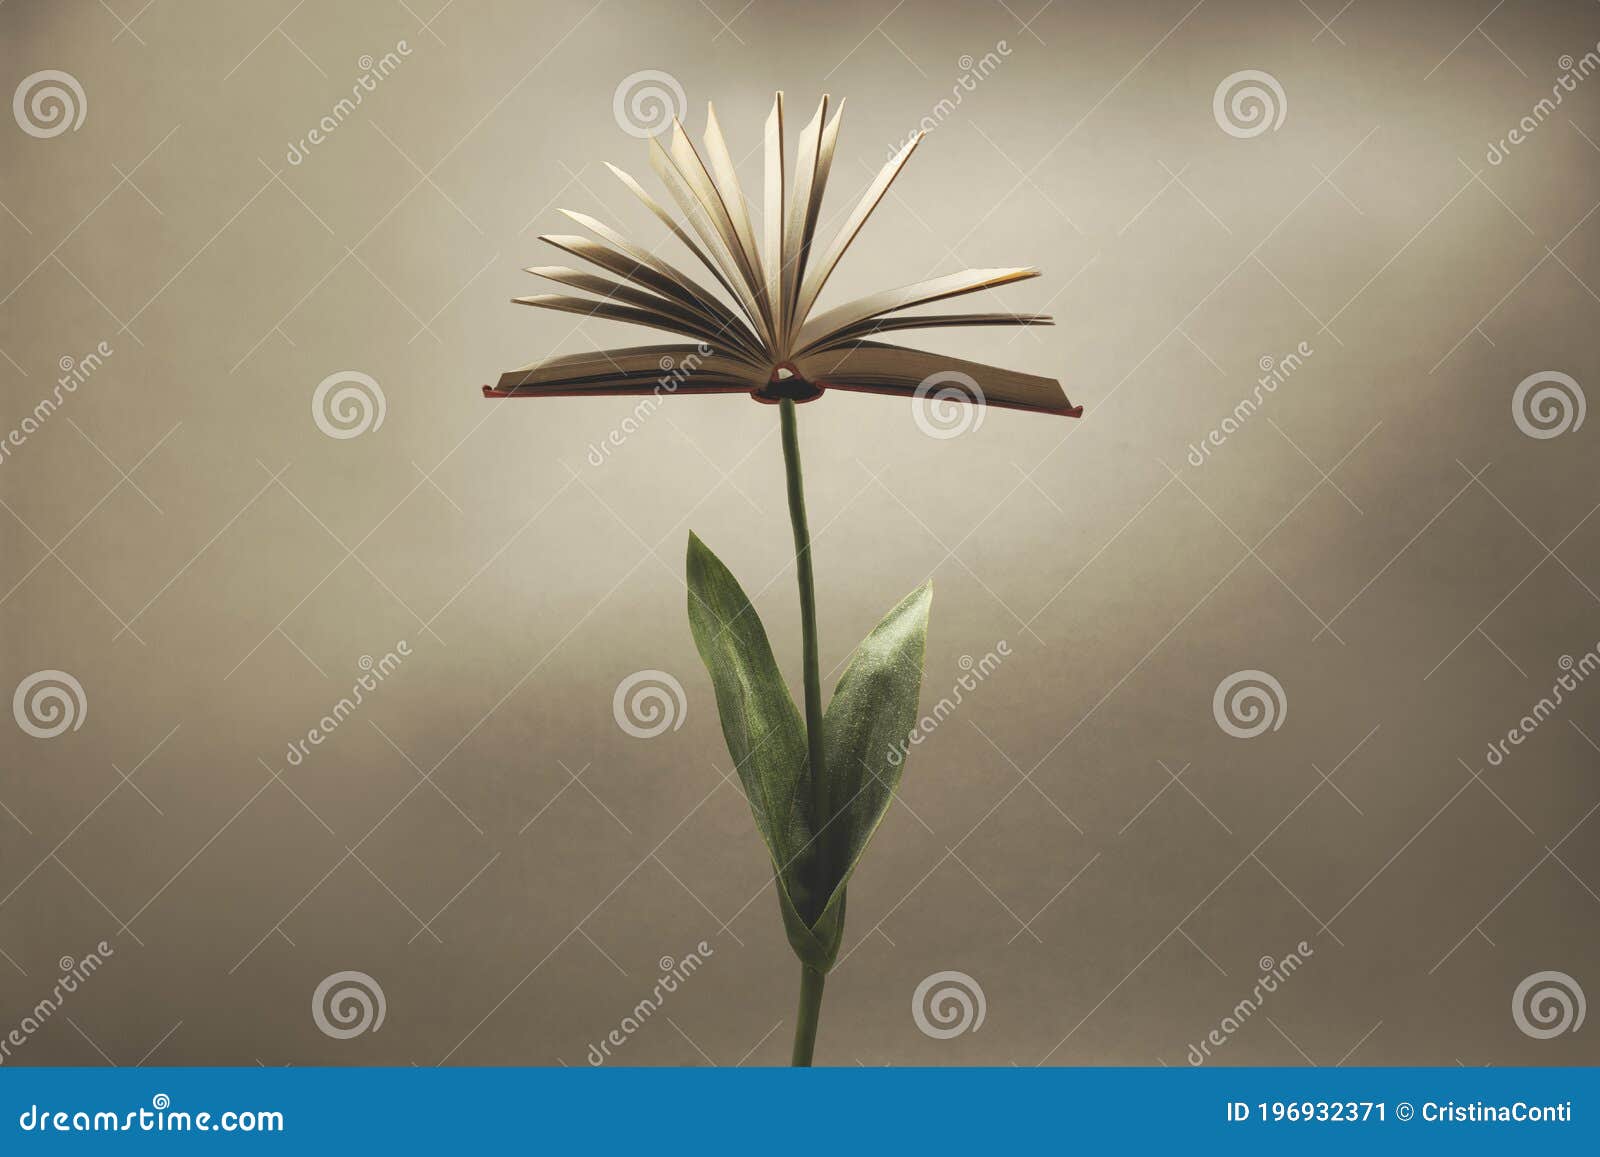 surreal plant with an open book that replaces the flower; fantasy concept